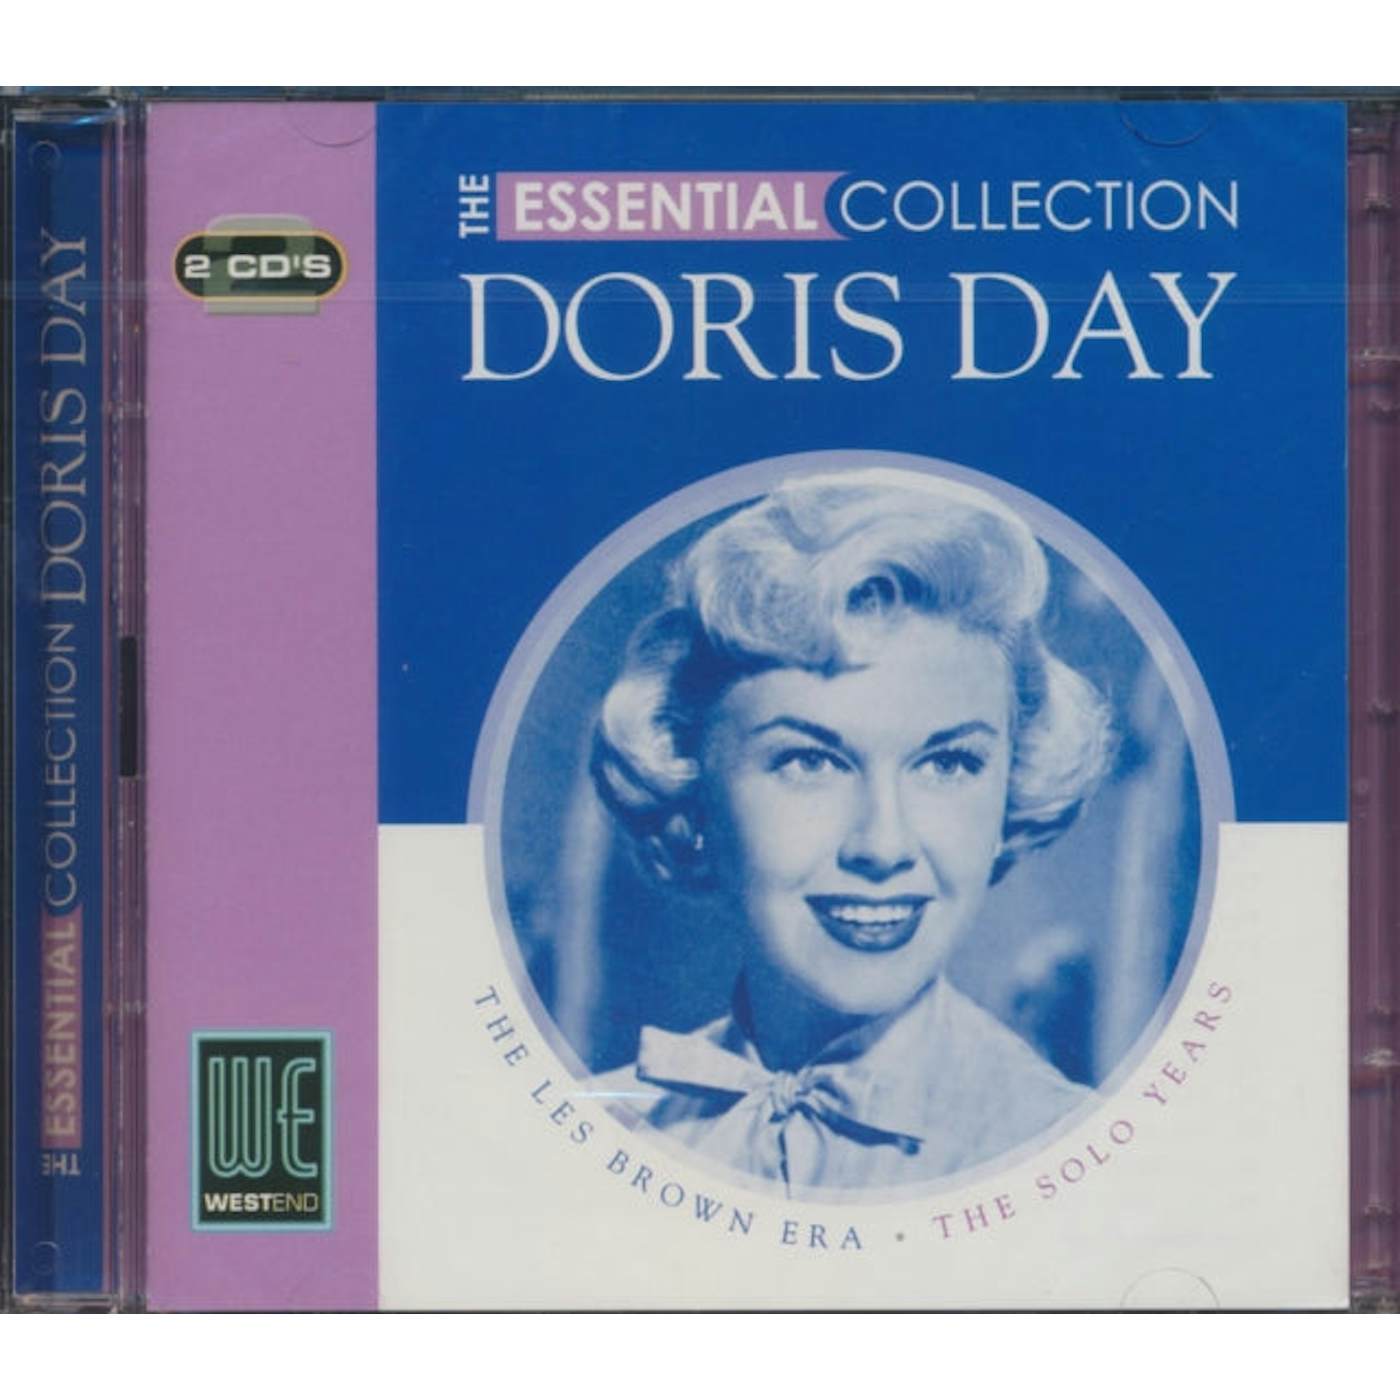 Doris Day CD - The Essential Collection